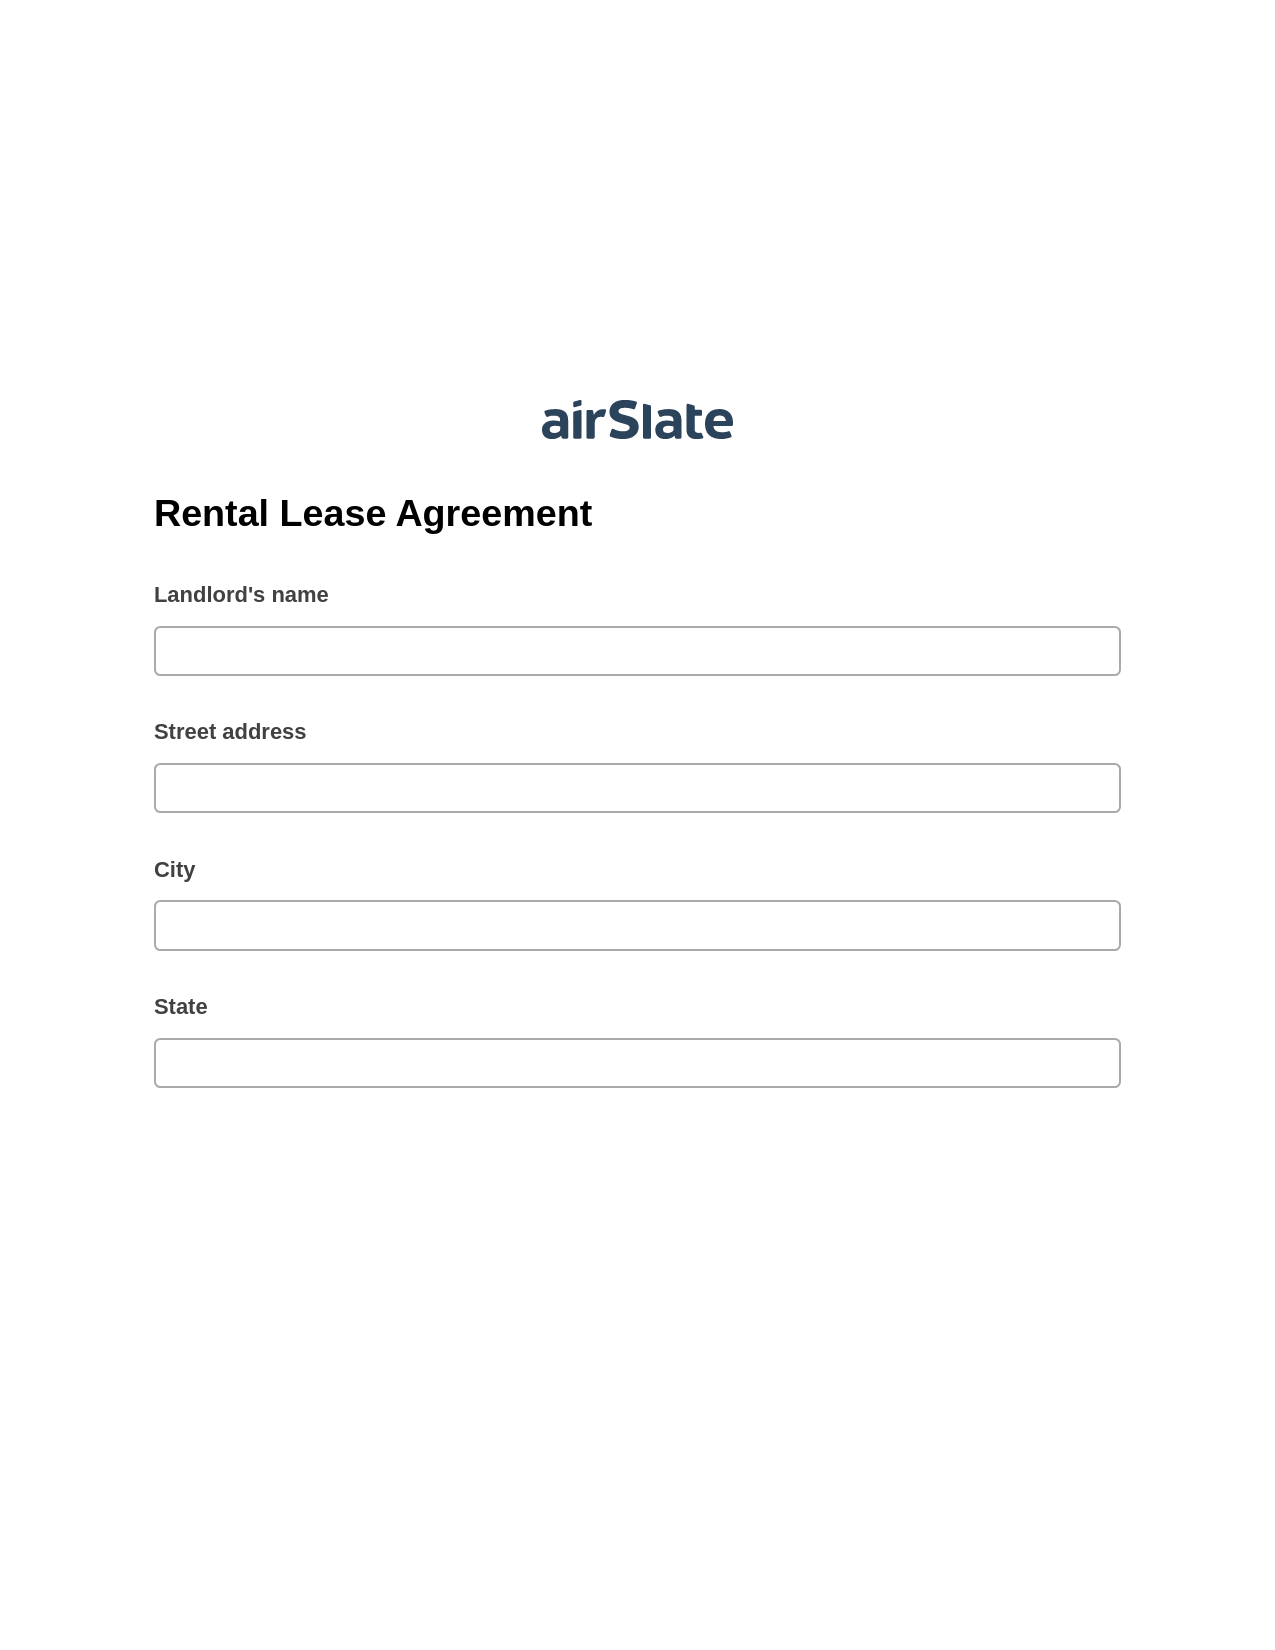 Rental Lease Agreement Pre-fill from Excel Spreadsheet Dropdown Options Bot, Export to MS Dynamics 365 Bot, Archive to SharePoint Folder Bot